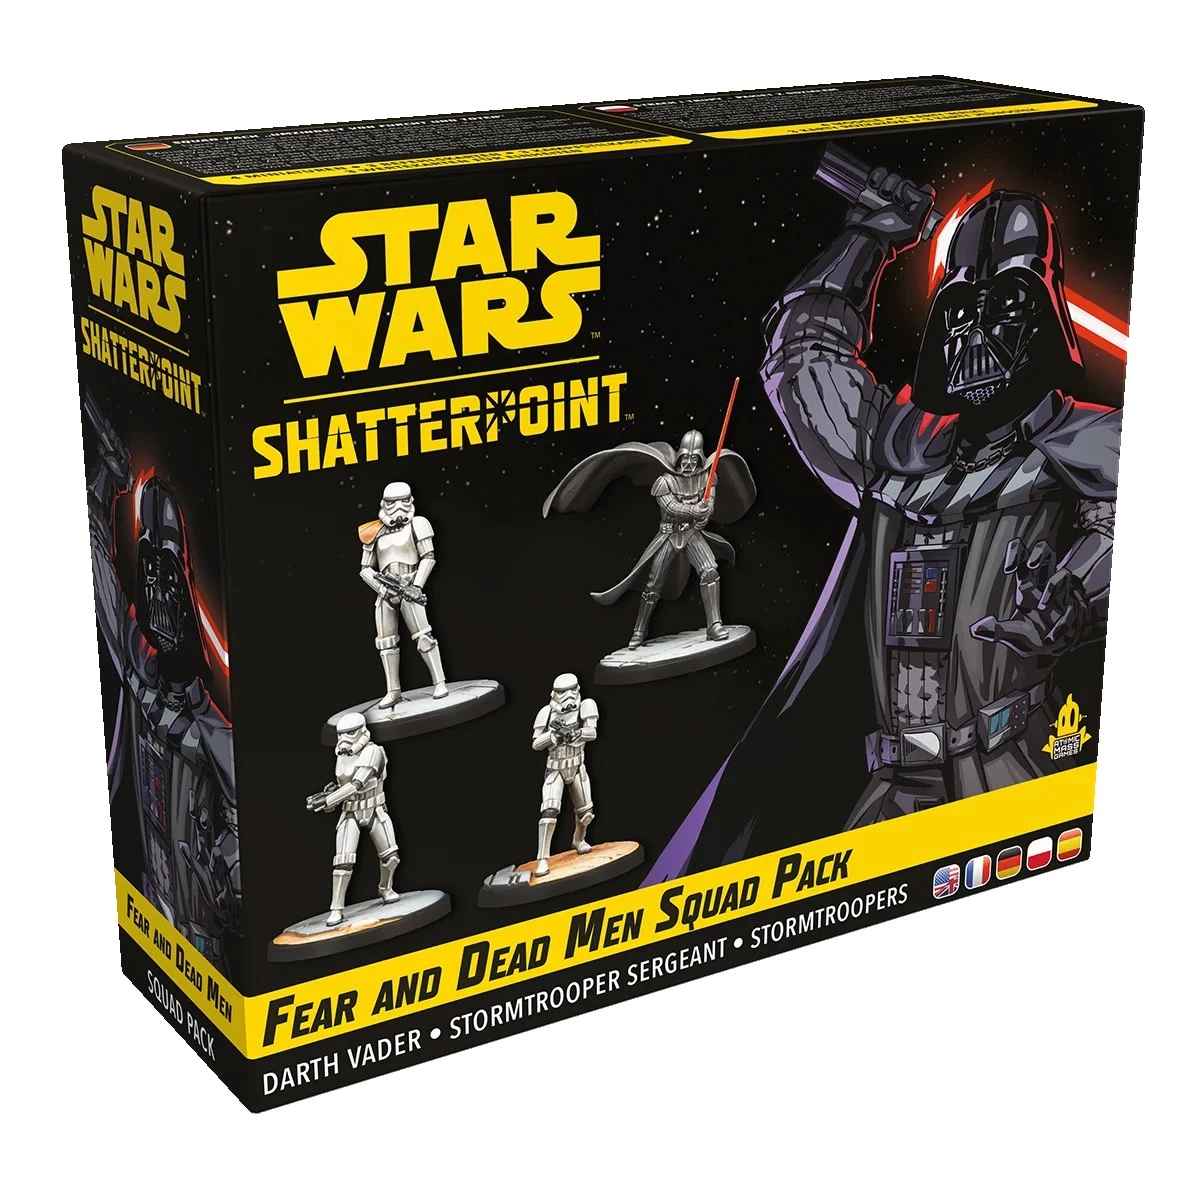 Star Wars: Shatterpoint - Fear and Dead Men Squad Pack - Hobbytech Toys